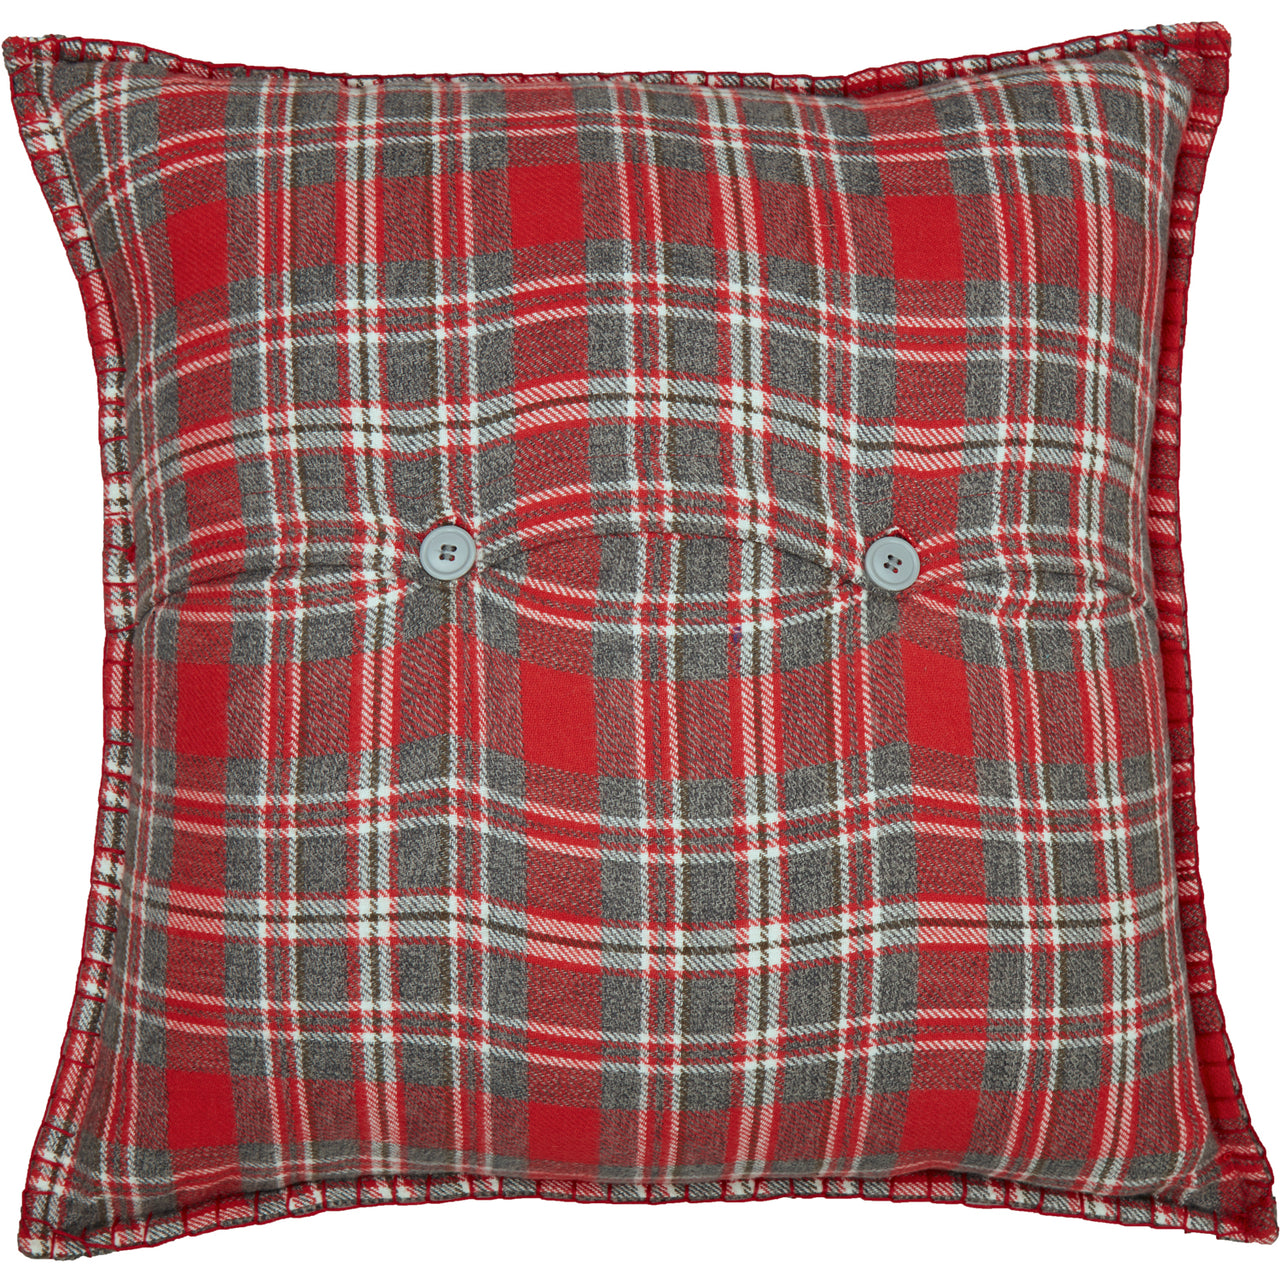 Anderson Warm Wishes Pillow 18x18 VHC Brands